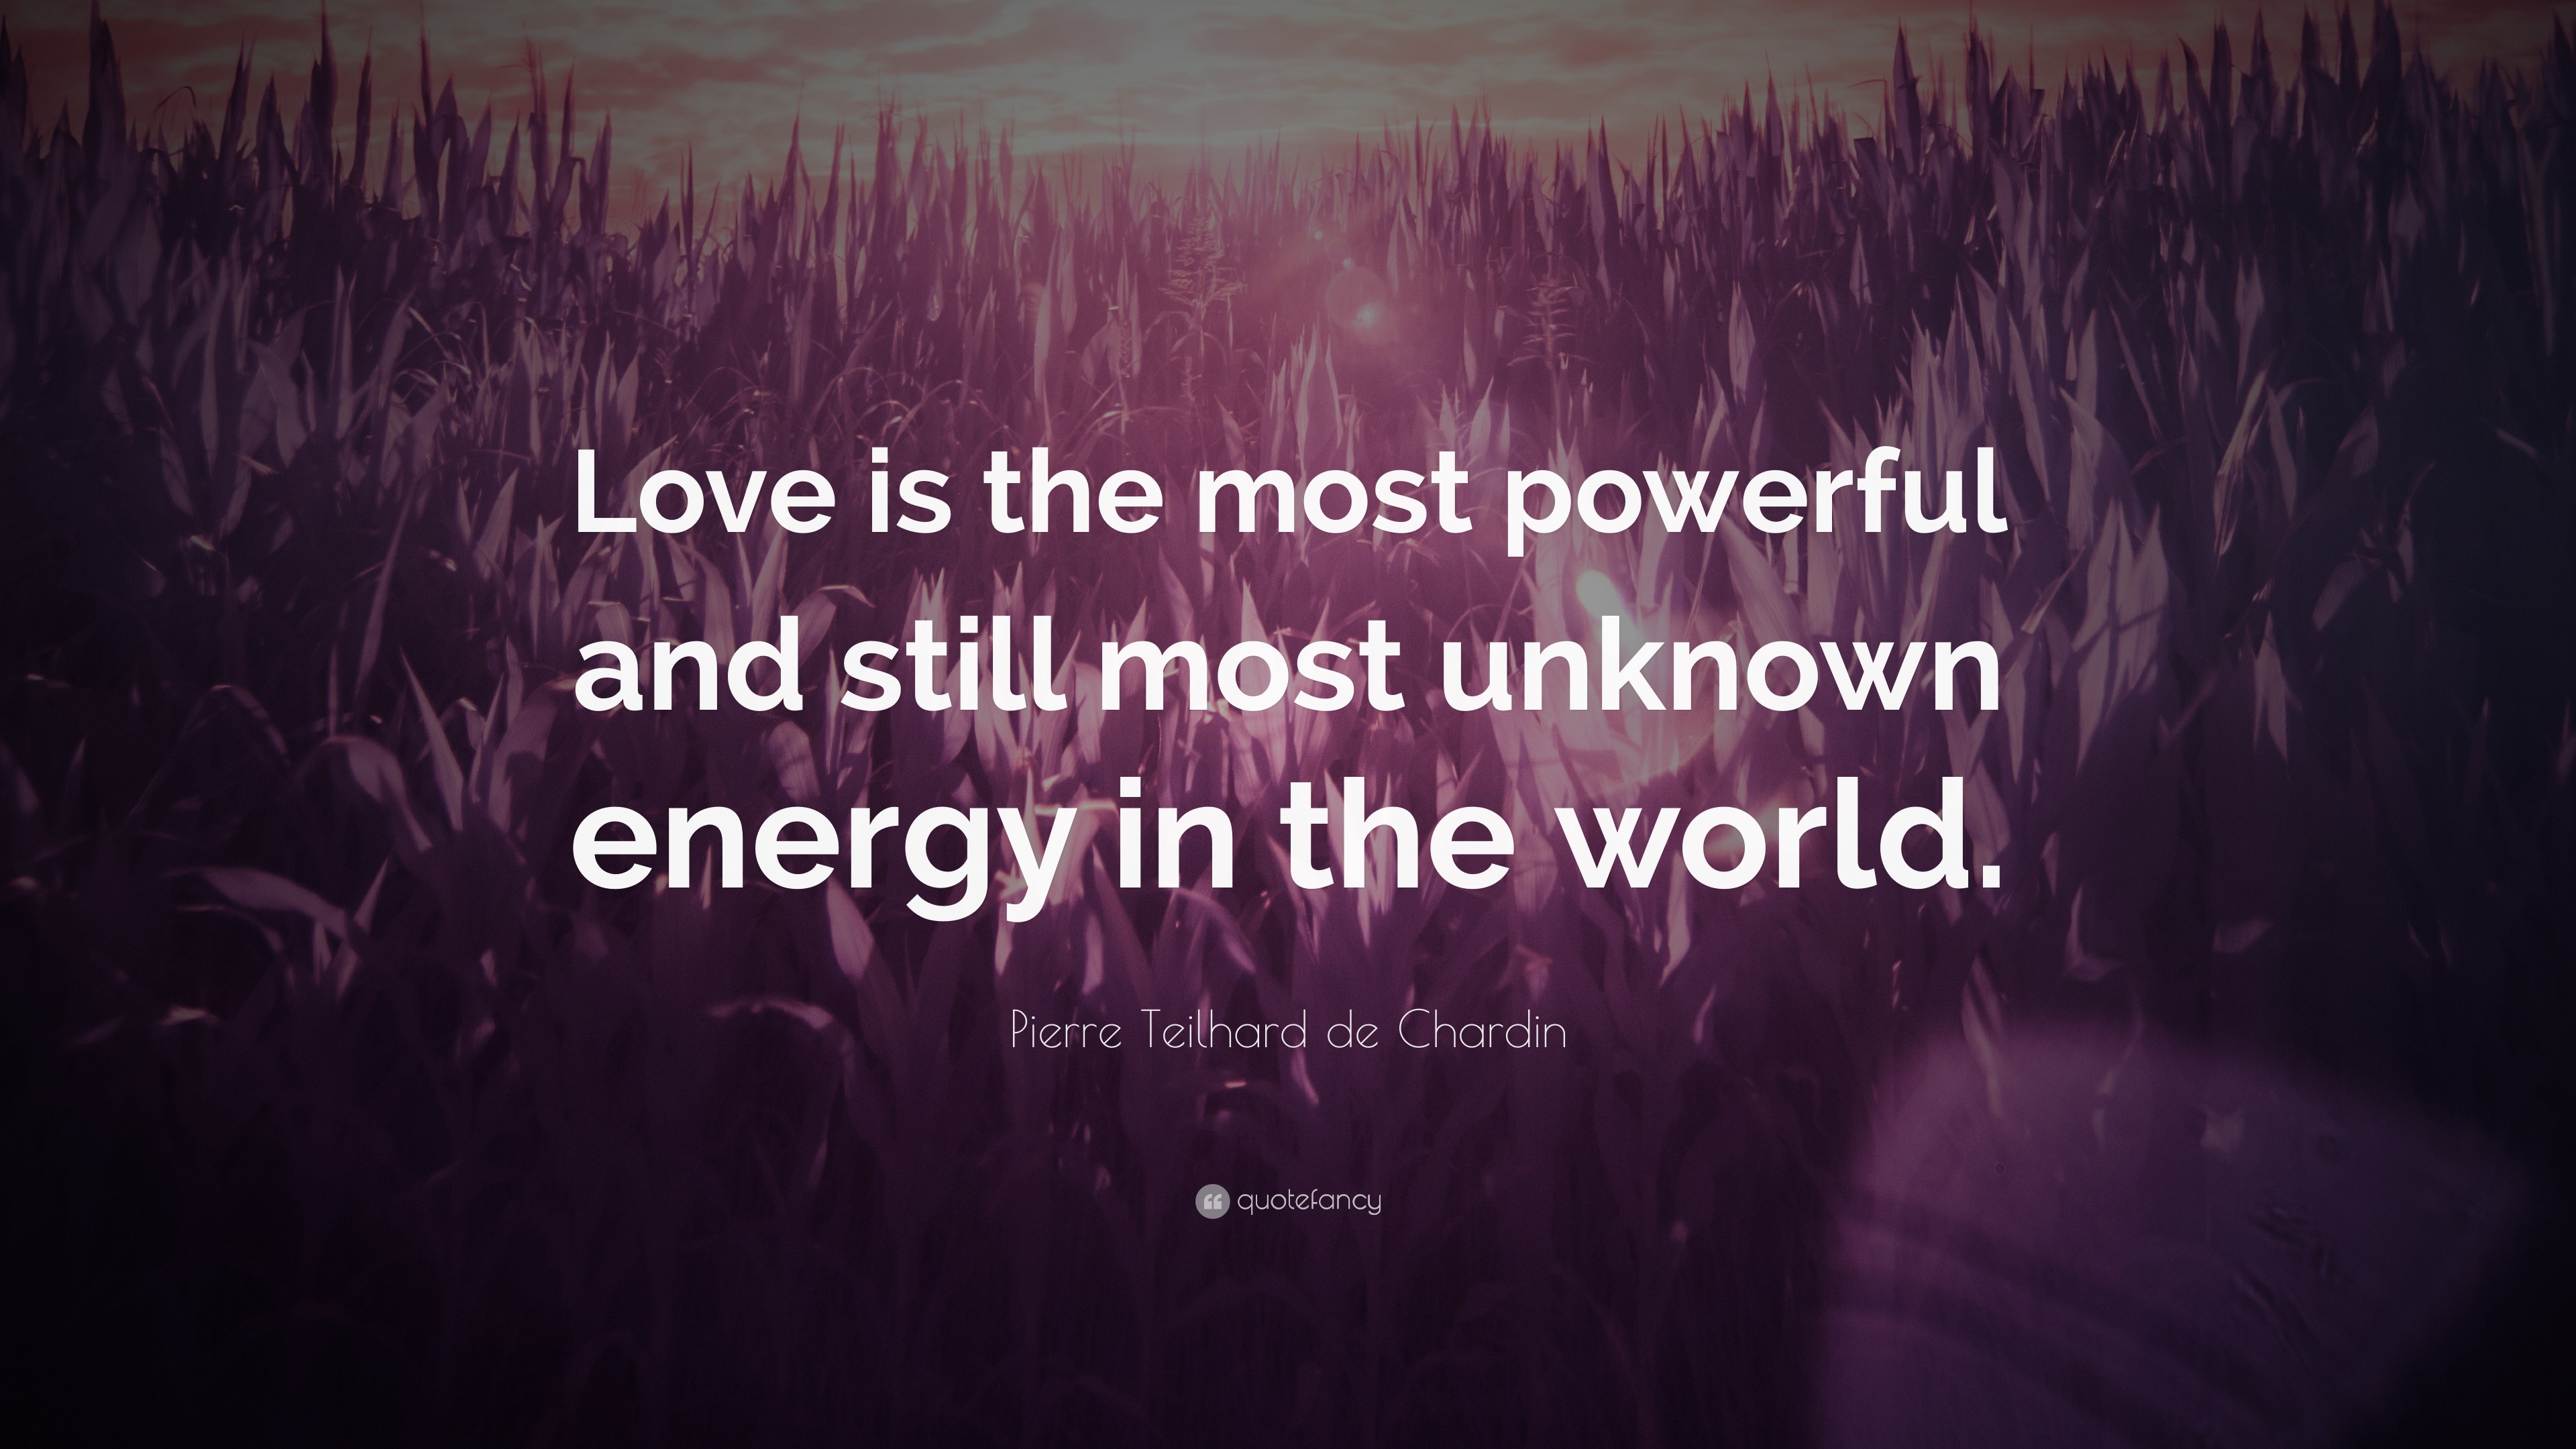 Pierre Teilhard de Chardin Quote   Love  is the most  